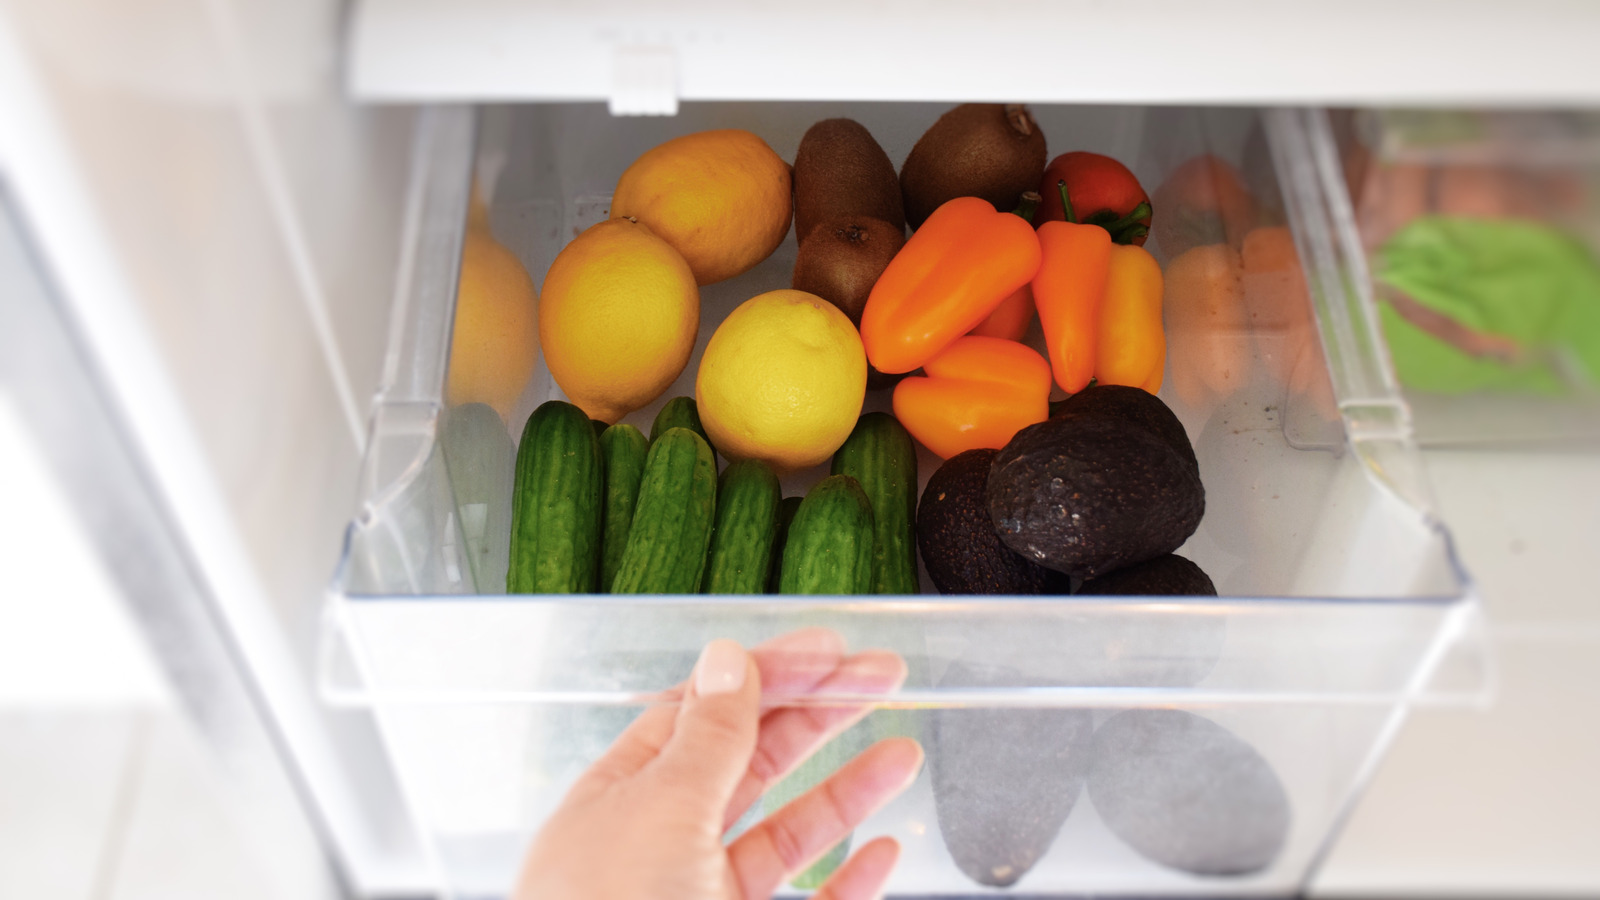 Here's Why You Should Line Your Crisper Drawer with Paper Towels